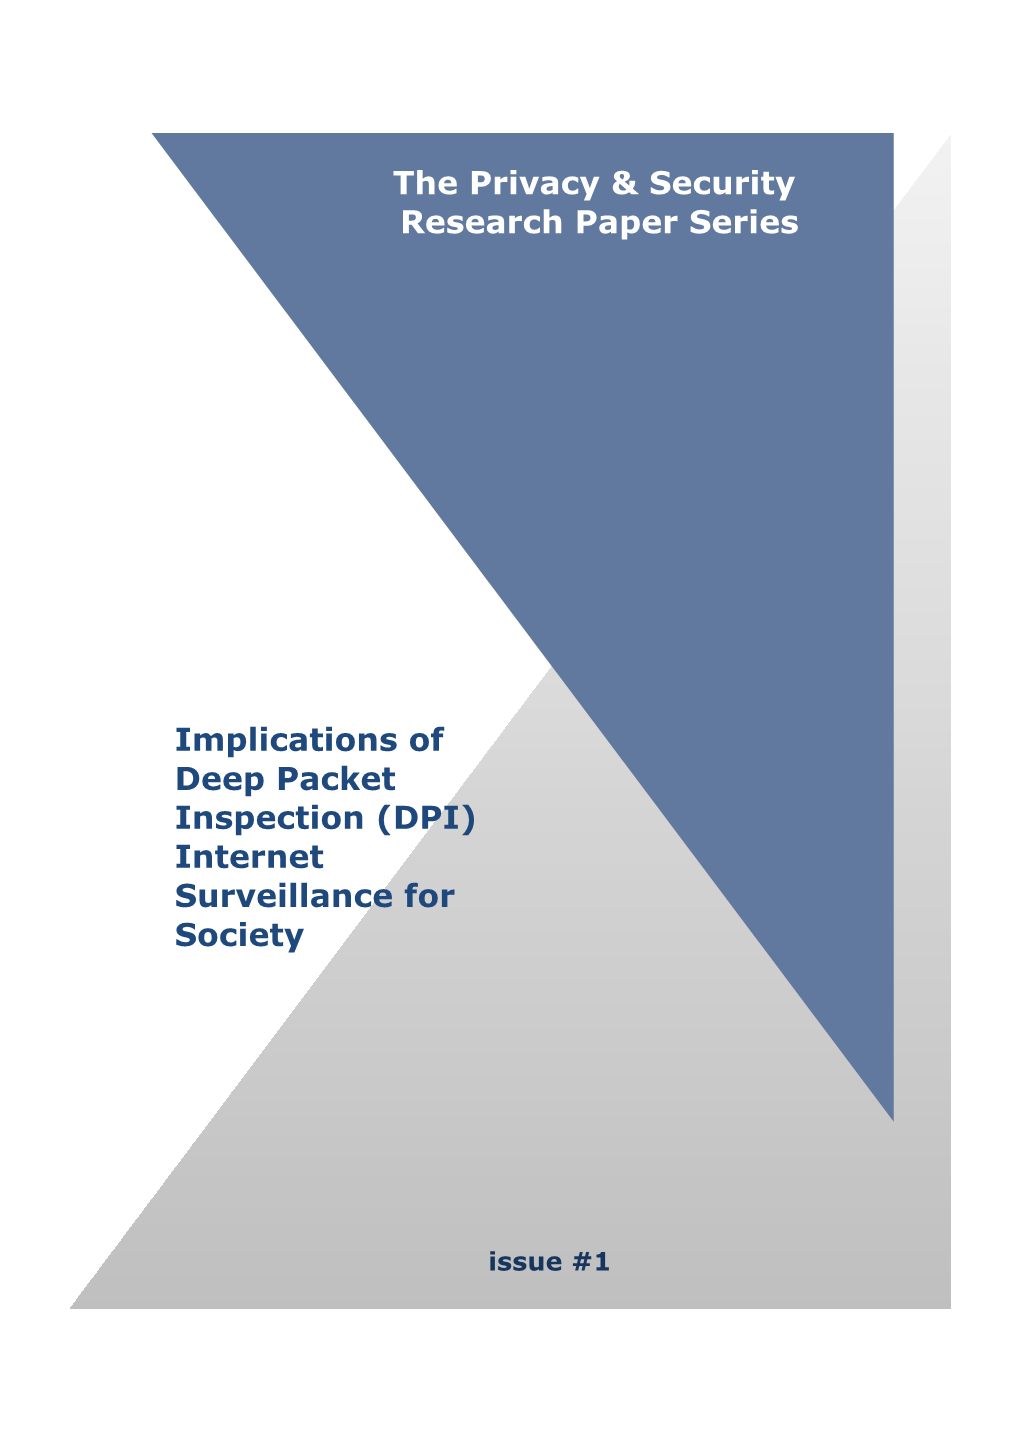 Implications of Deep Packet Inspection (DPI) Internet Surveillance for Society